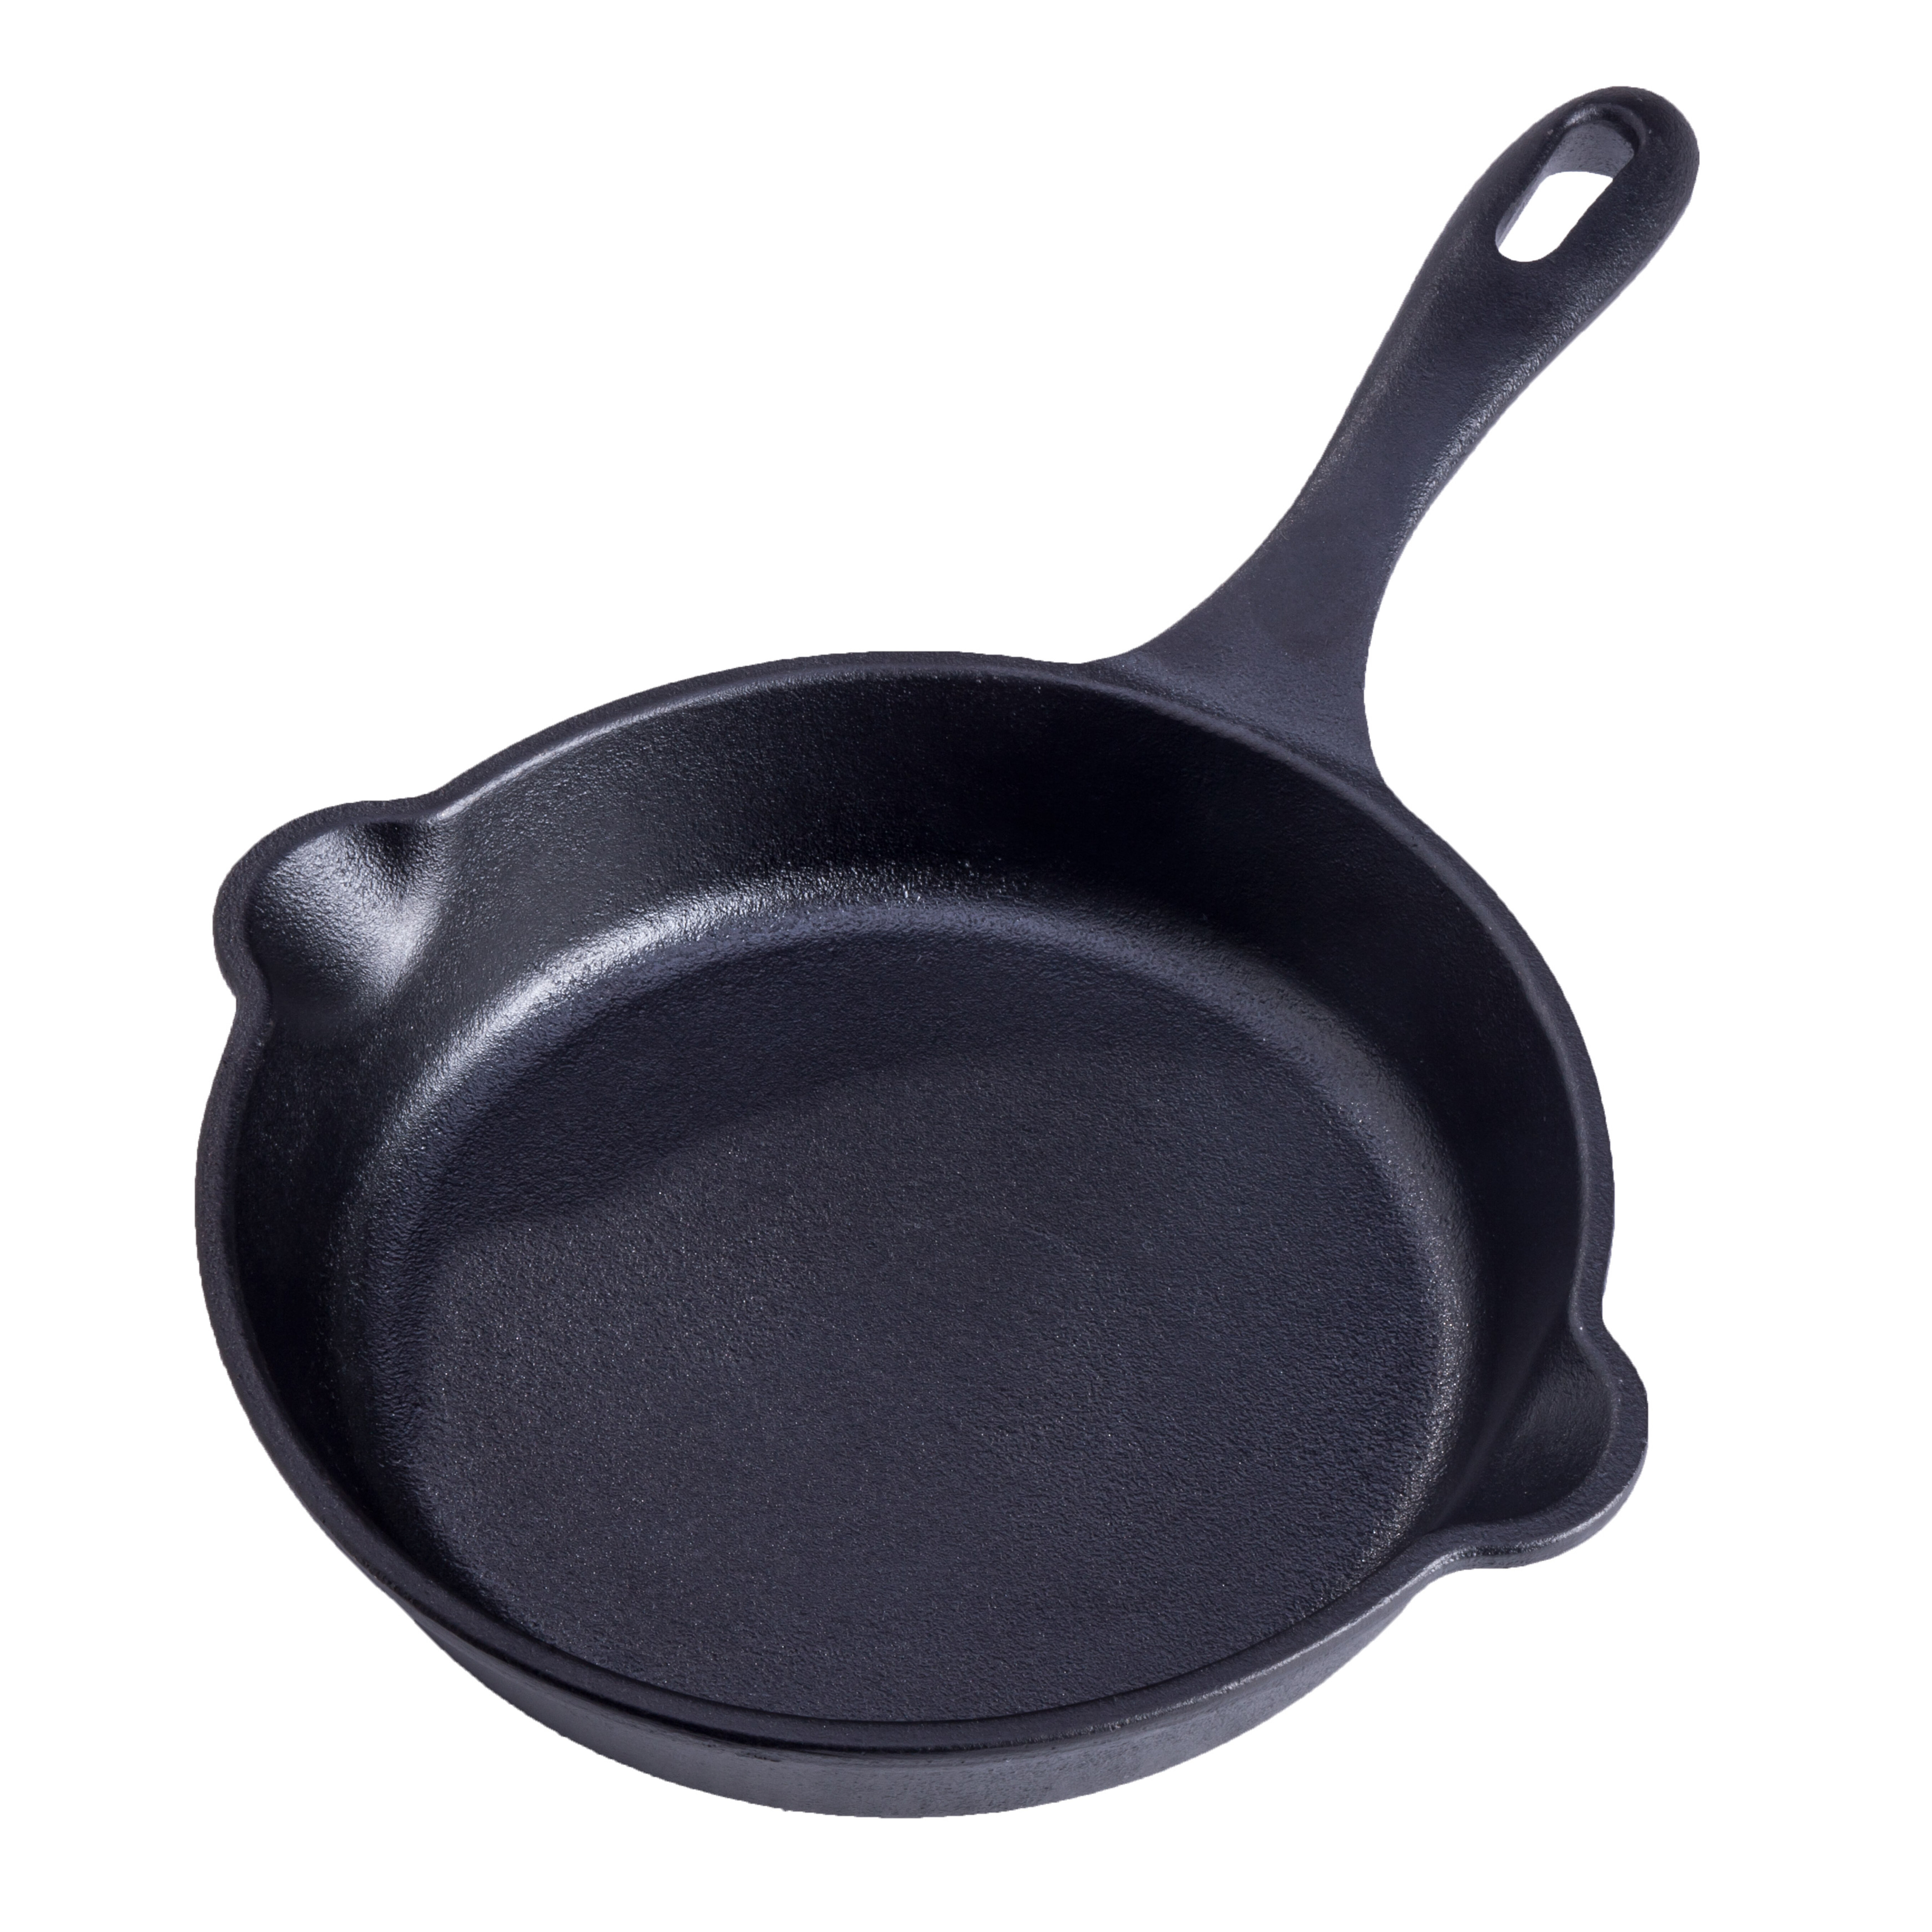  Victoria 4-Inch Cast Iron Skillet, Pre-Seasoned Cast Iron  Frying Pan with Long Handle, Made in Colombia: Home & Kitchen